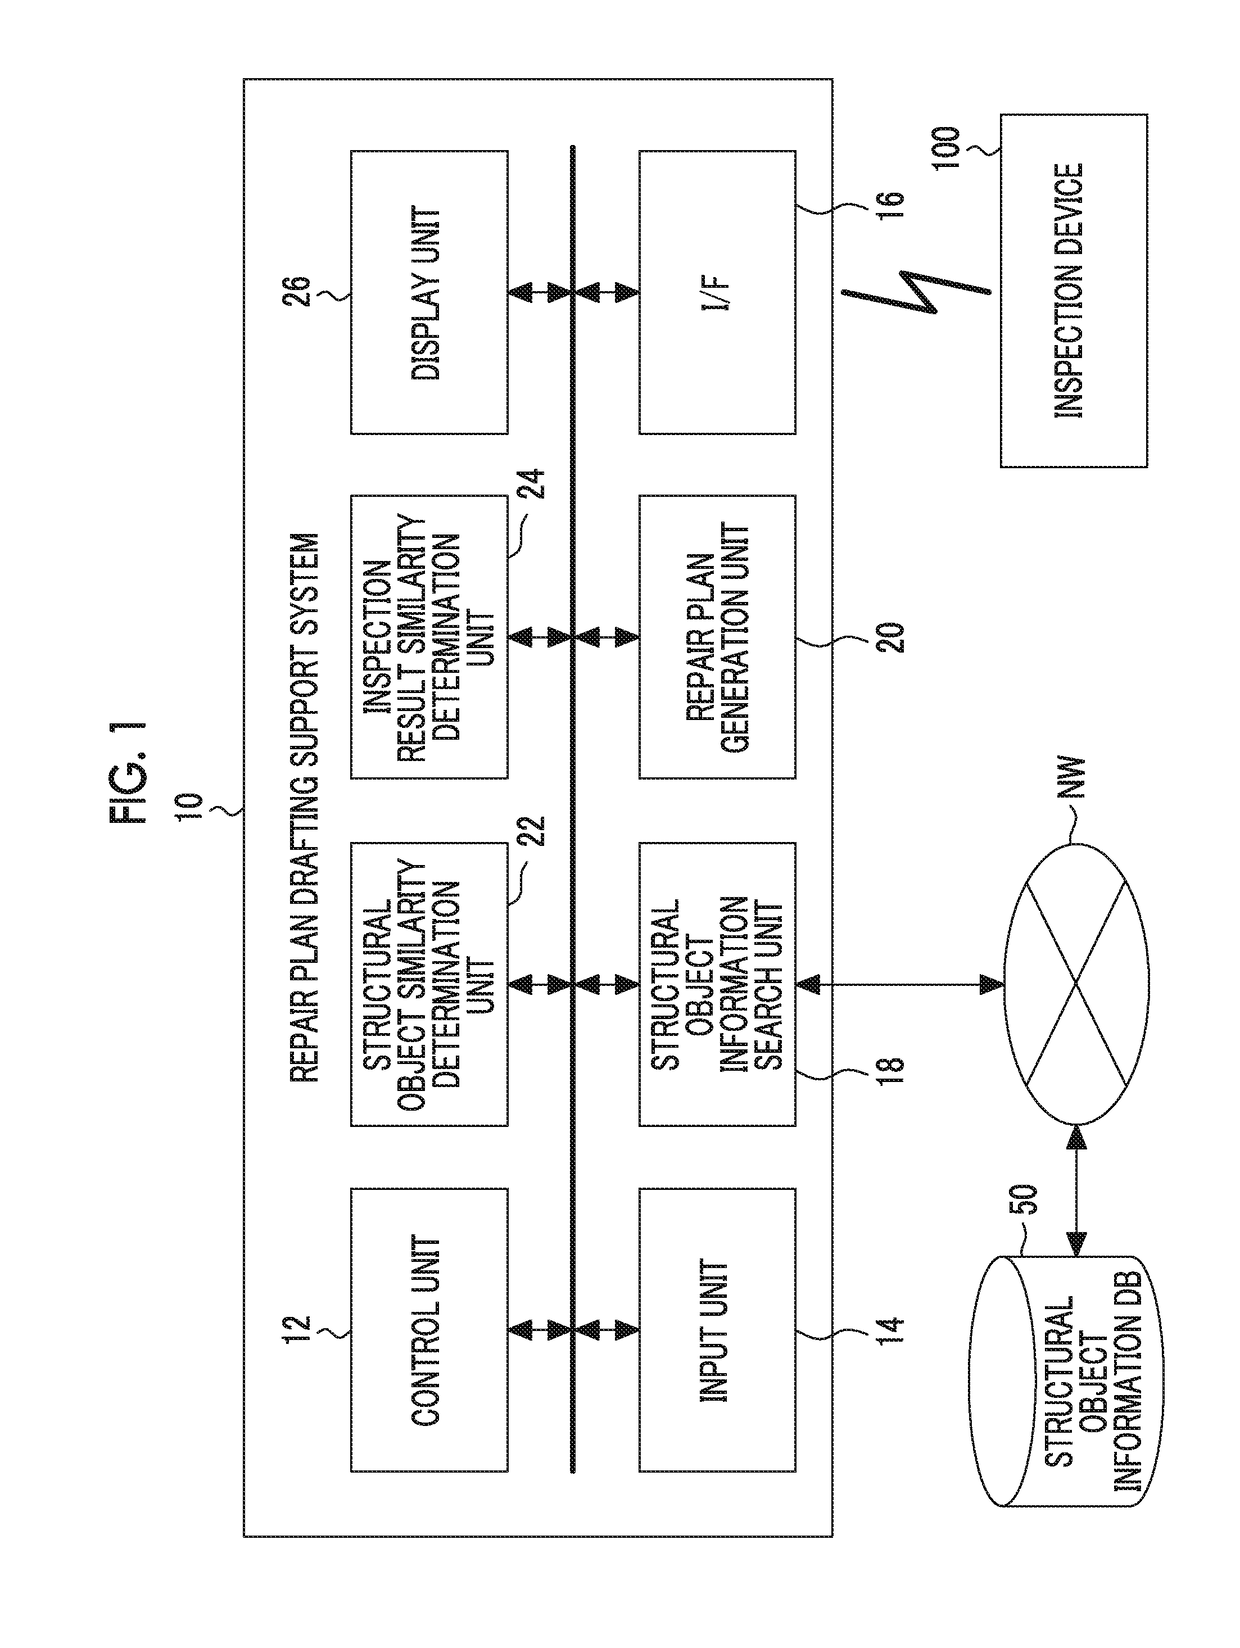 Repair plan drafting support system, method, and program